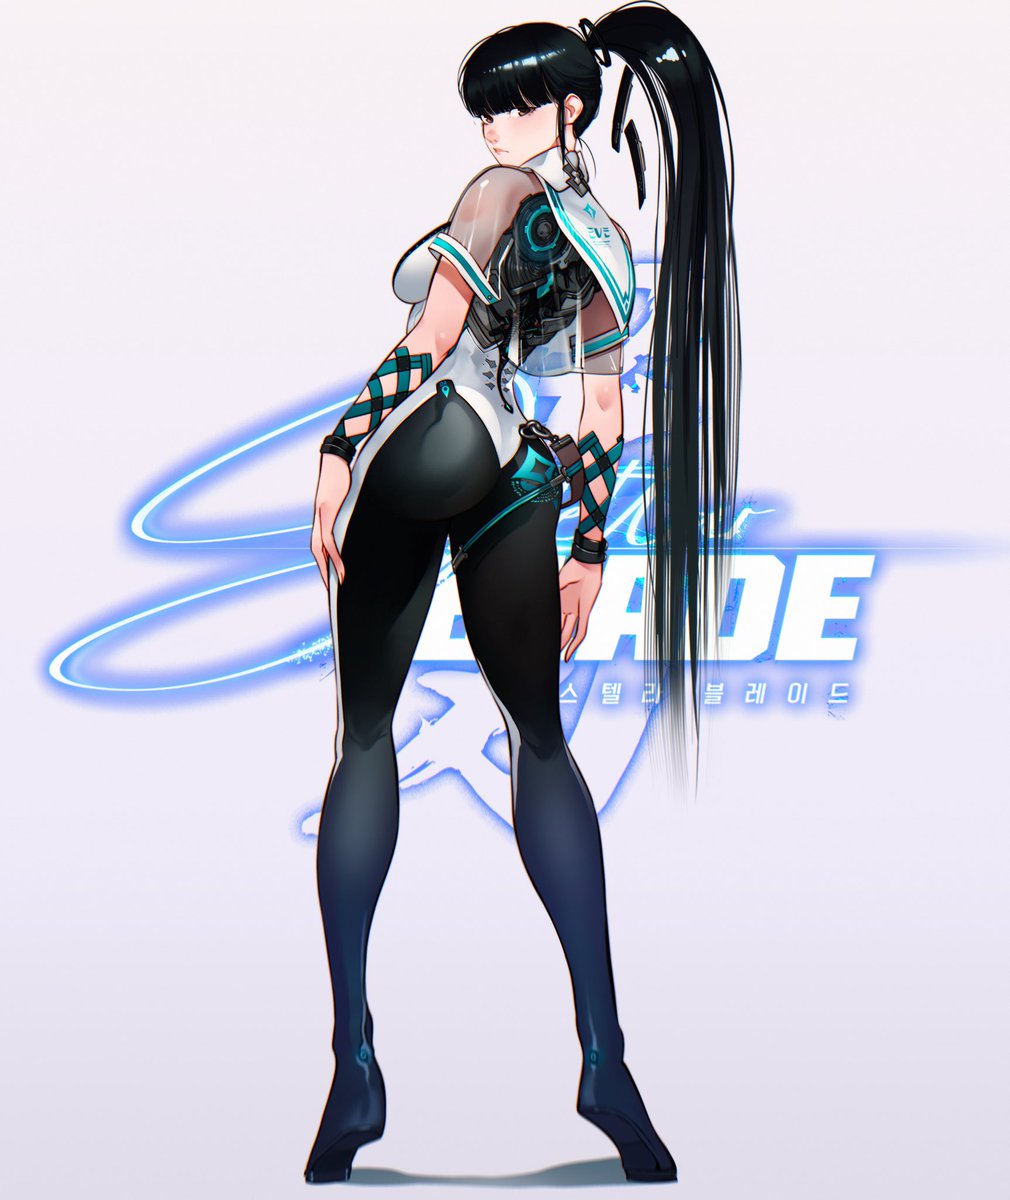 All her outfits have so many details D: haha but it is kinda fun too  #StellarBlade #Eve #animefanart #PlayStation #StellarBladeDemo #animeartstyle